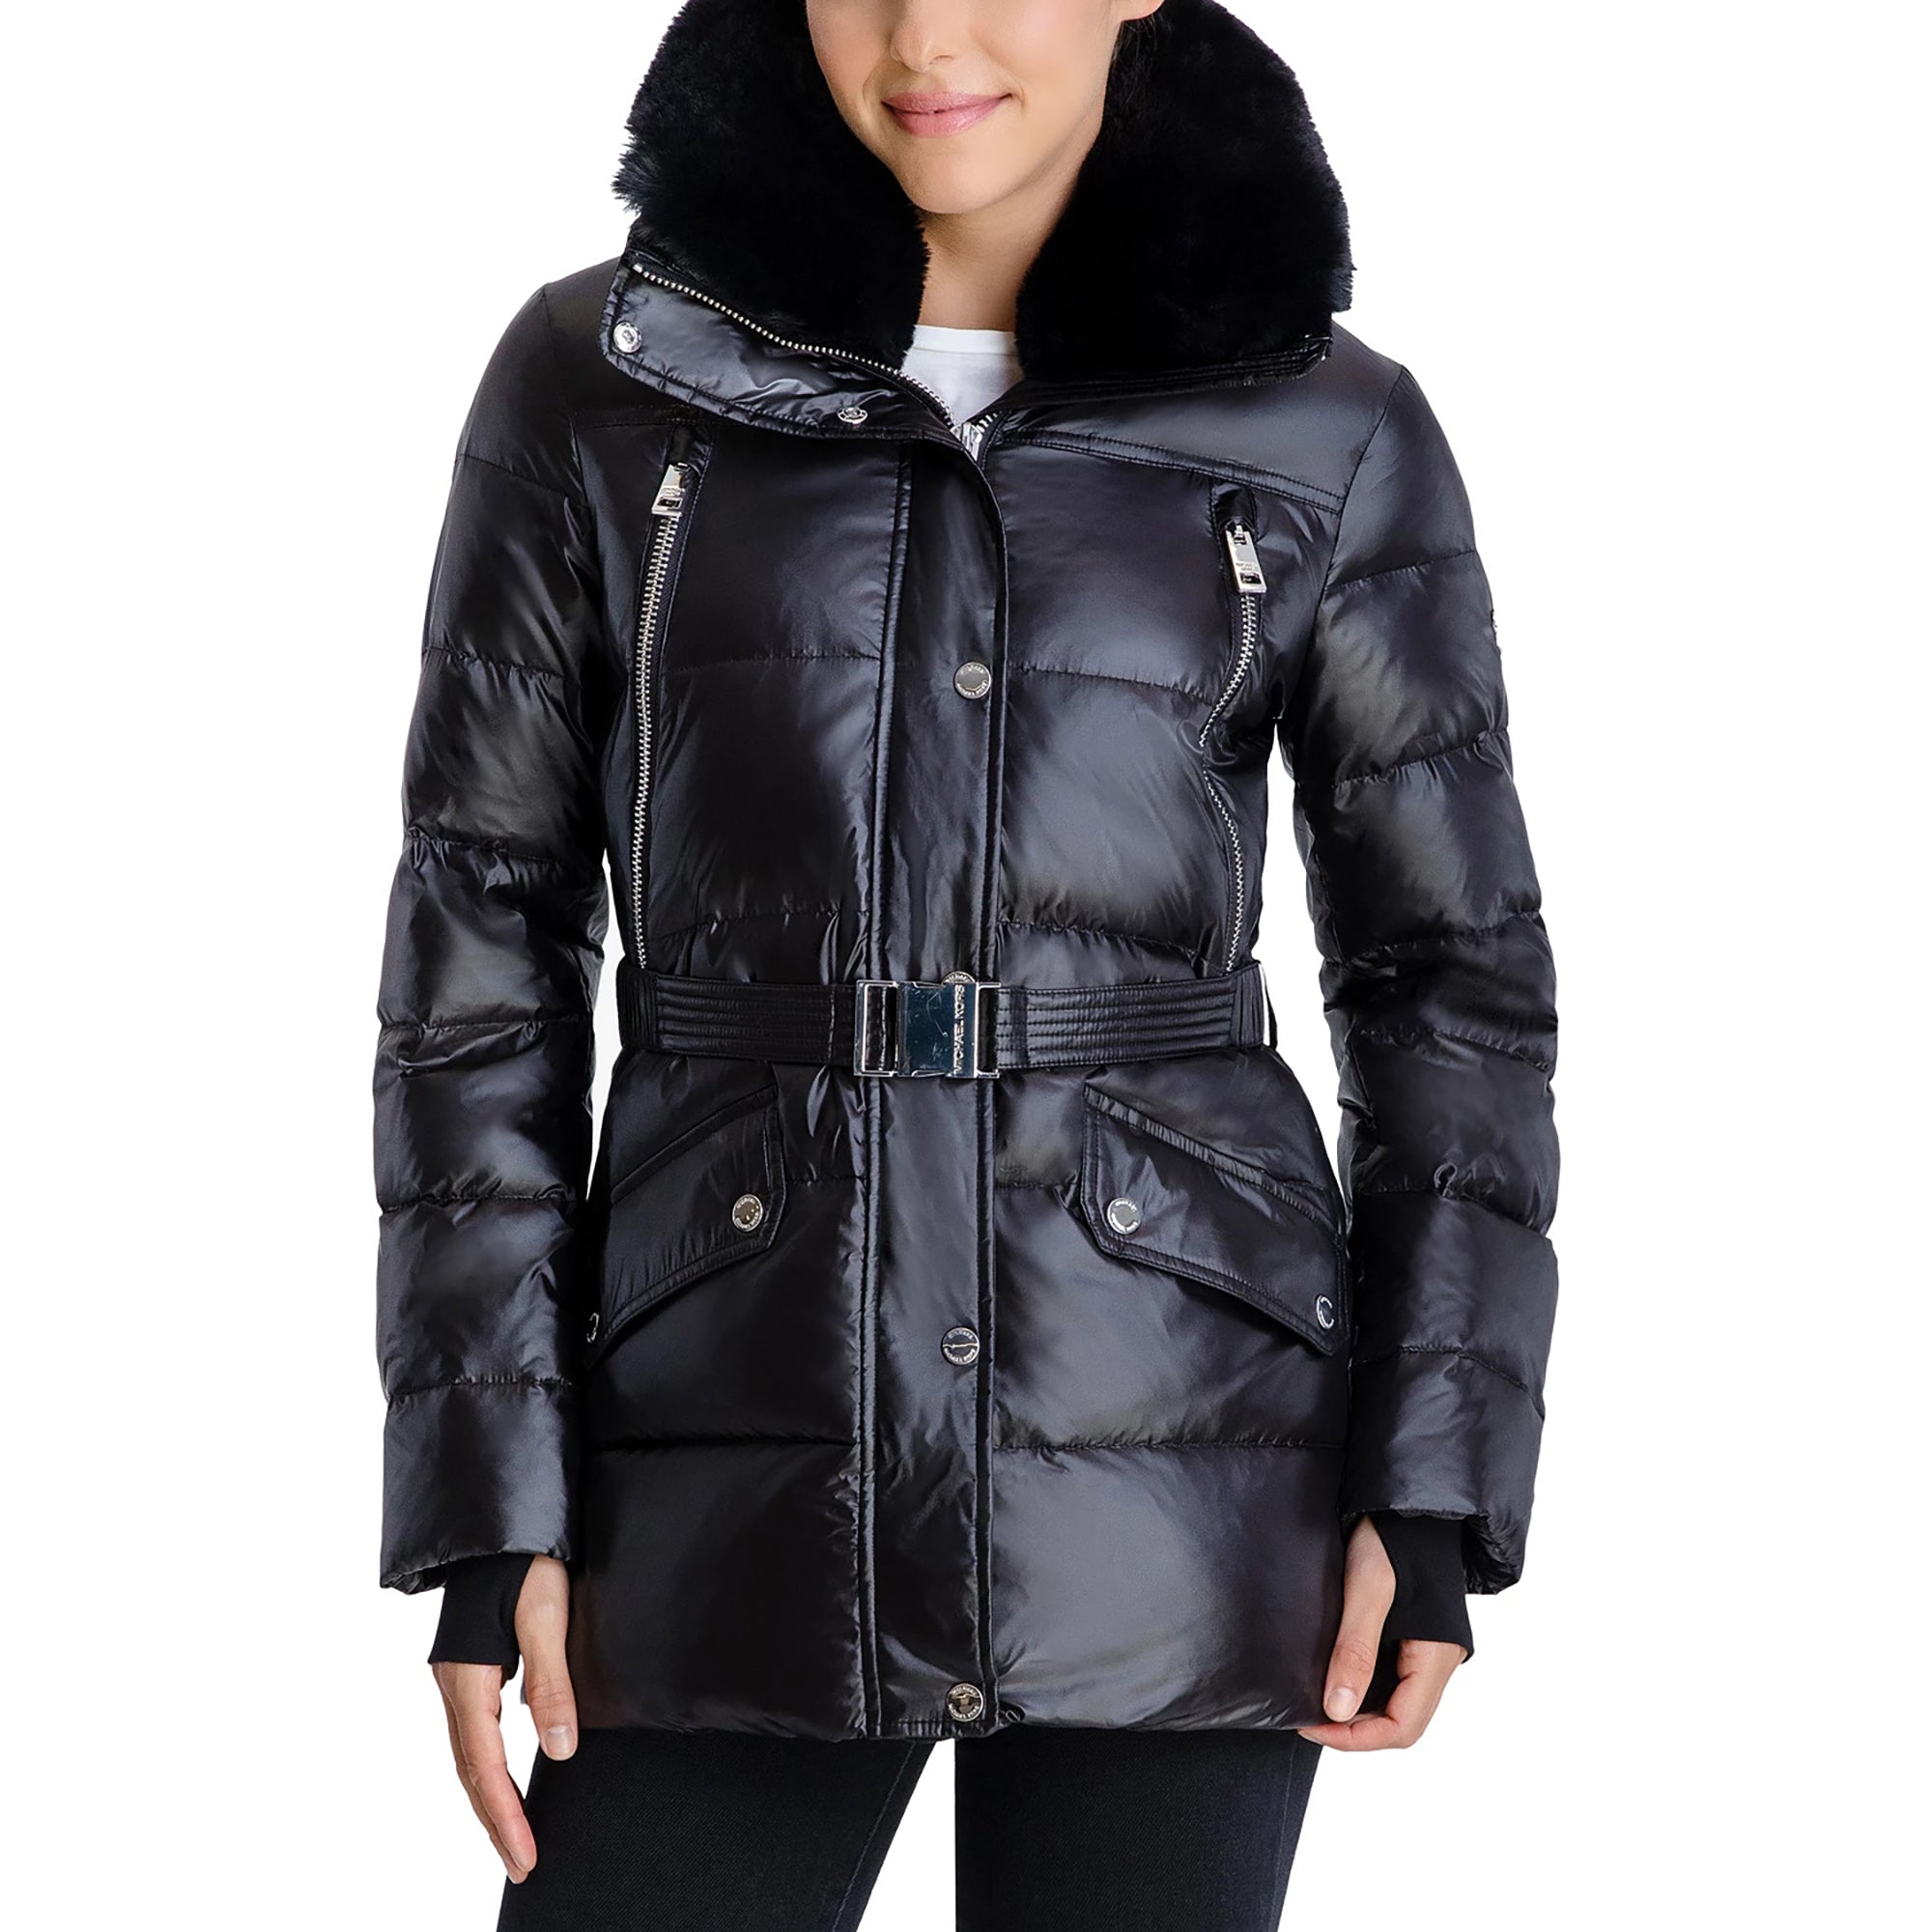 Michael Michael Kors Michael Kors Black Shiny Down Belted Faux Fur Collar Quilted Coat Jacket